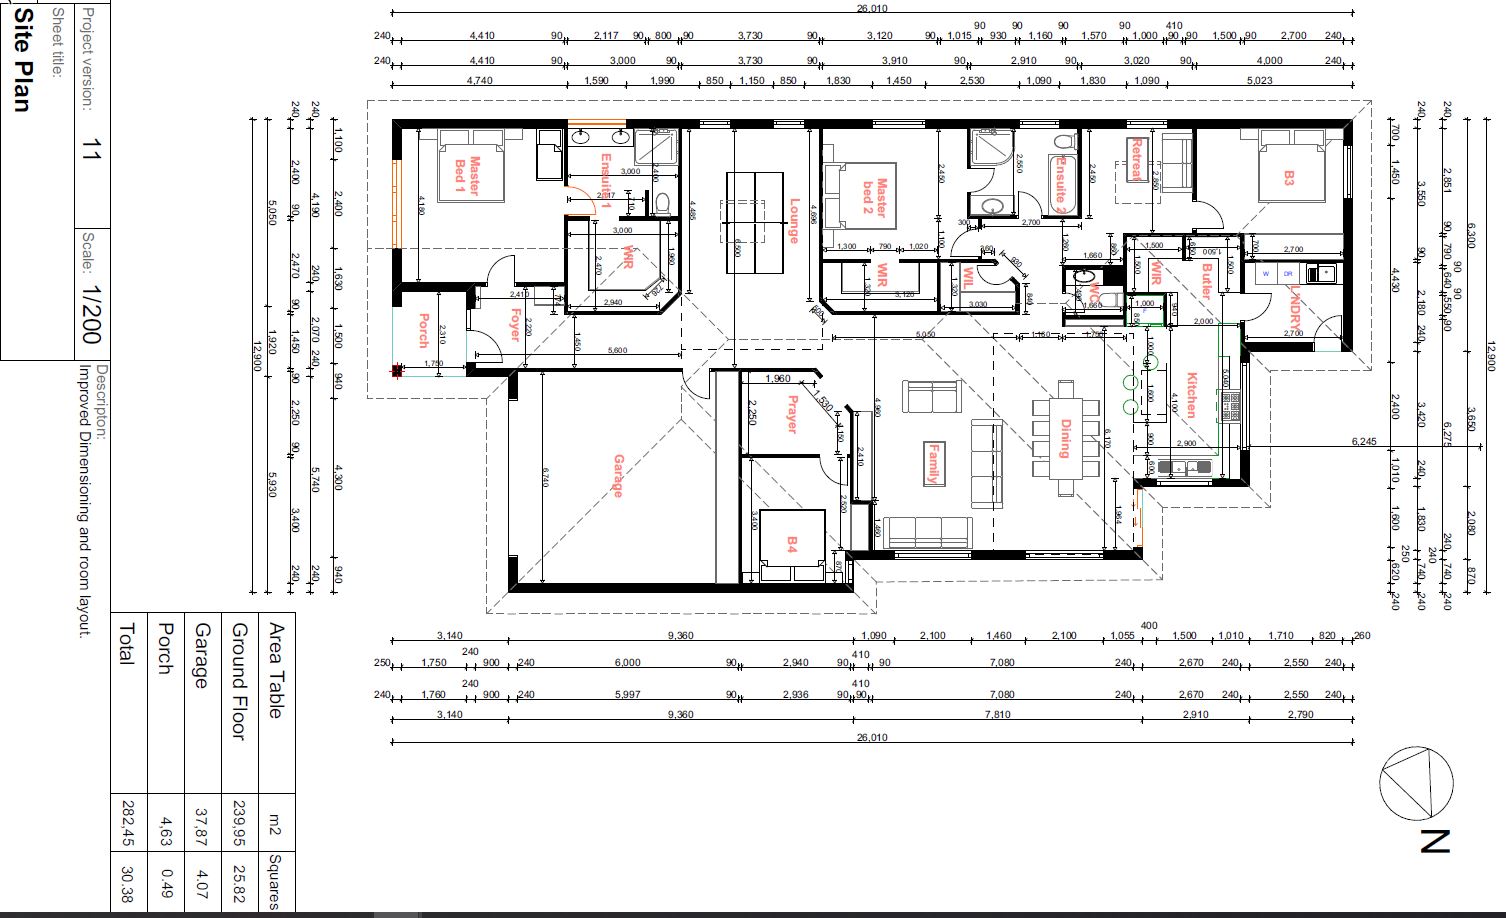 View Photo: Re: What do u think of this floorplan? comments appreciated